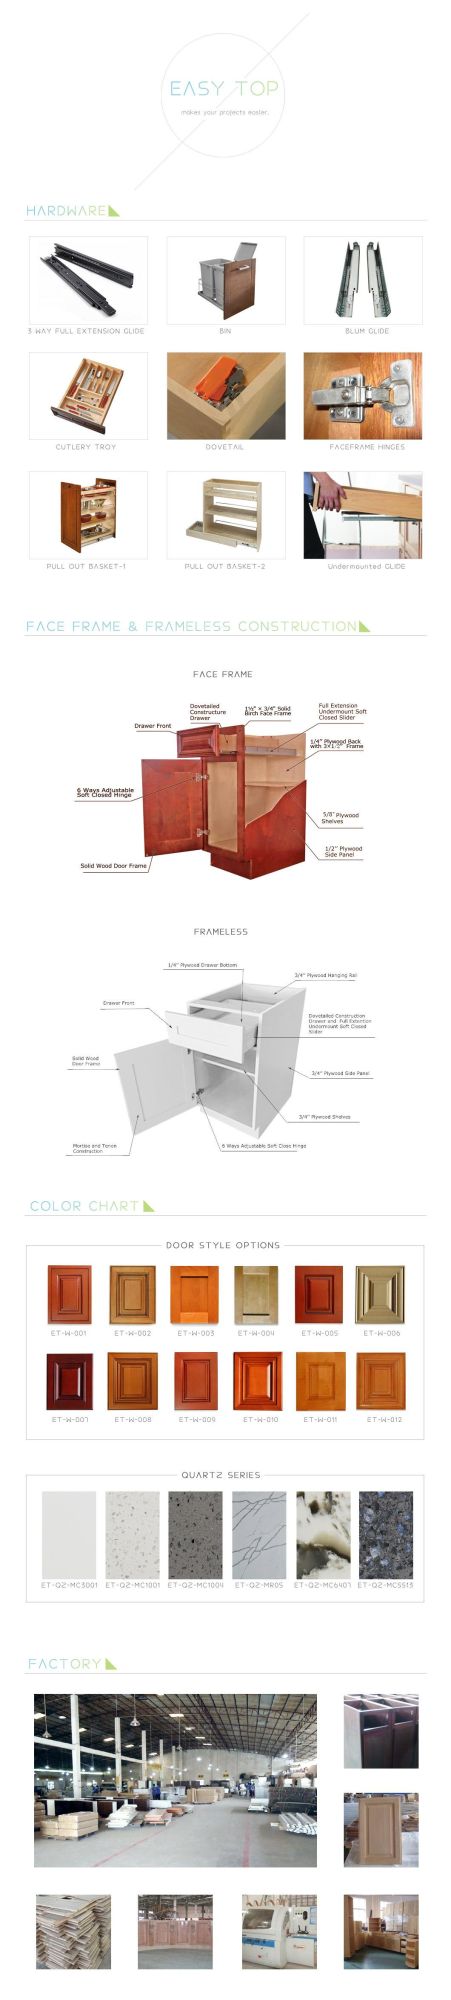 Competitive Price Modern Design Solid Wood Shaker Bathroom Vanity Cabinet From Factory Custom